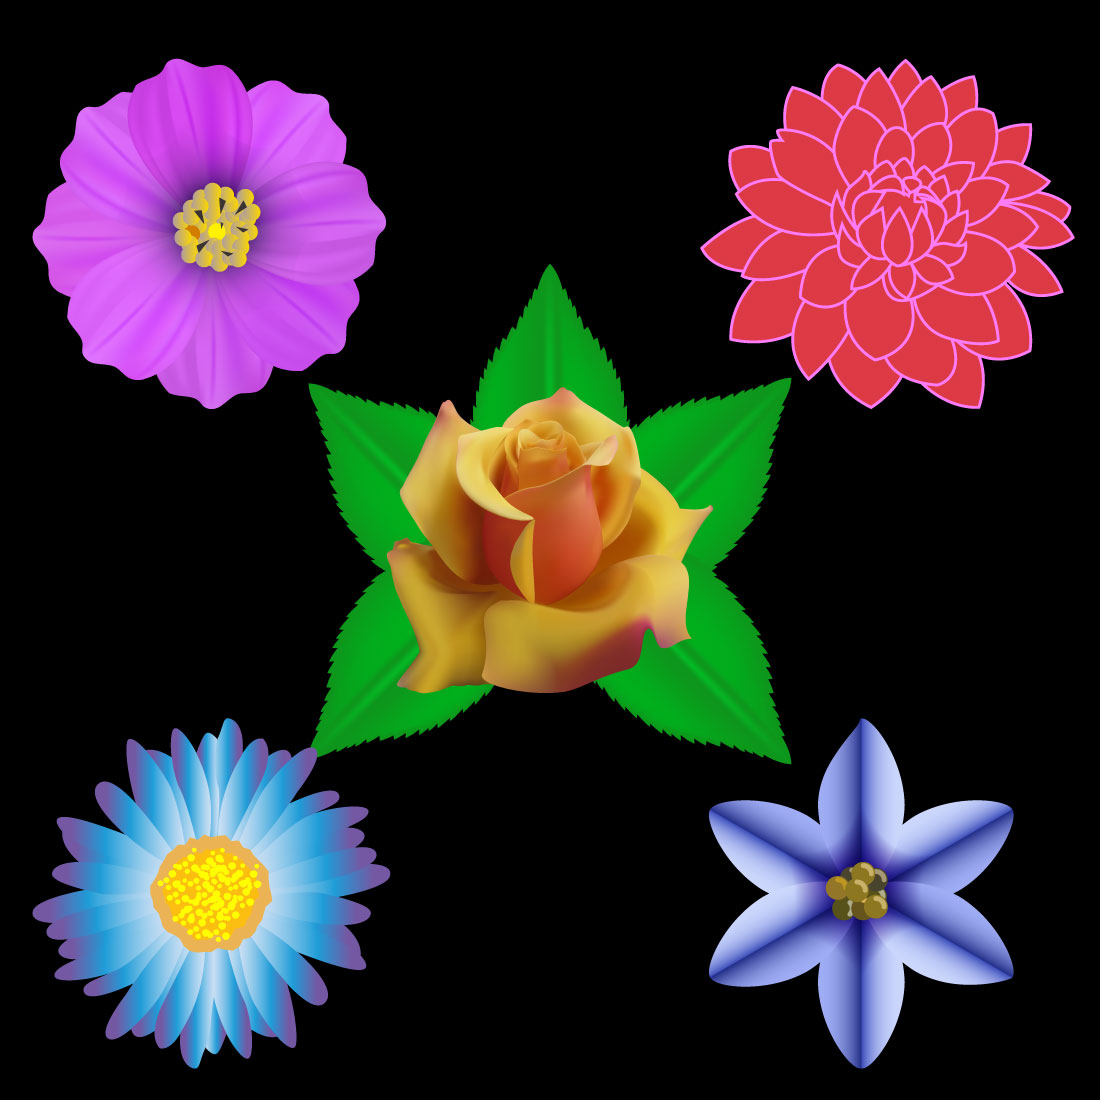 Botanic Flower Collection Graphics Design cover image.